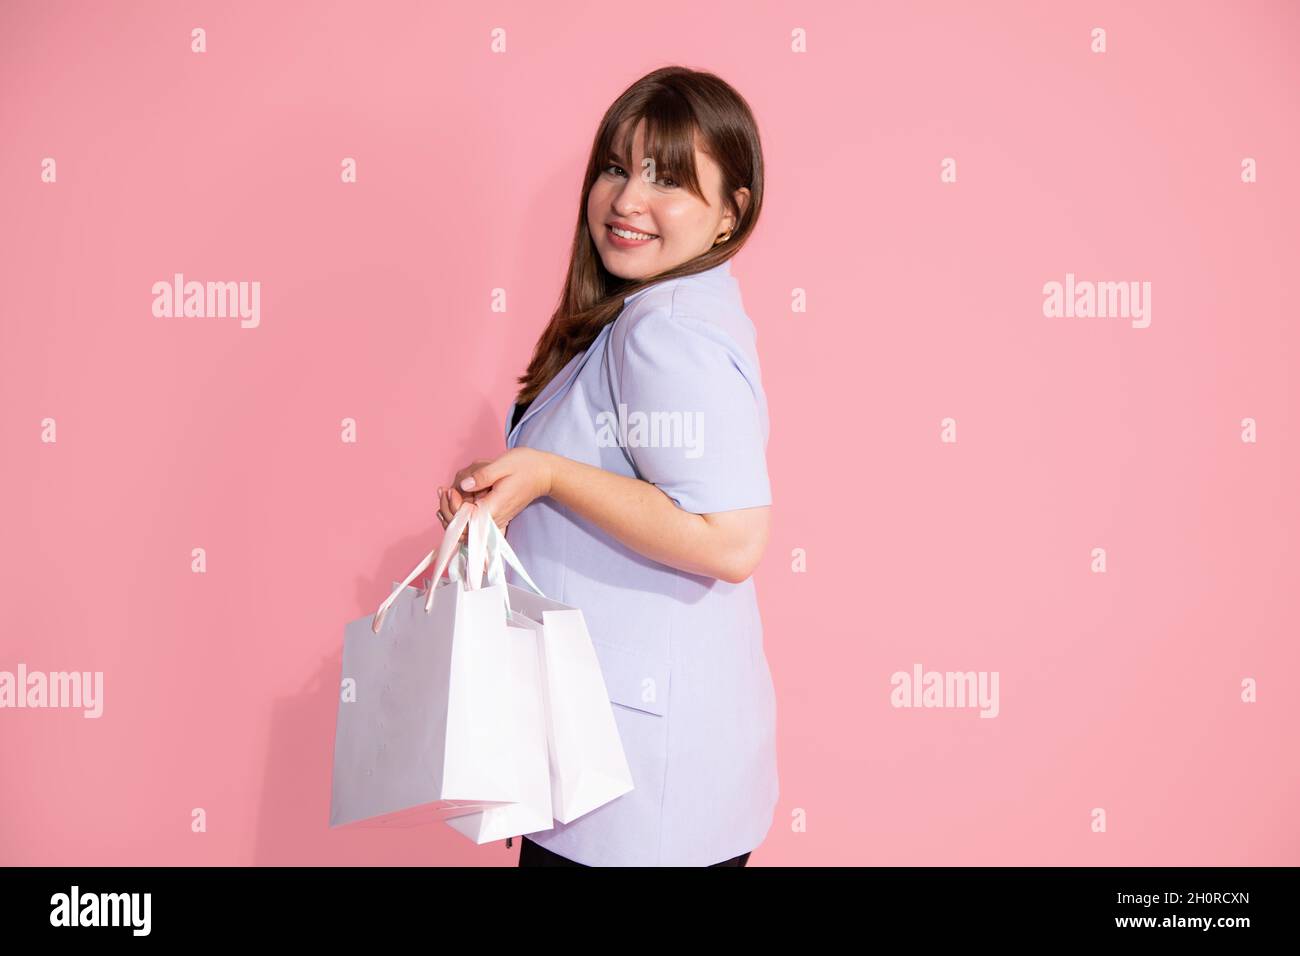 cheerful brunette young woman with bangs holdsshopping bags with packages on pink background in studio. Stock Photo